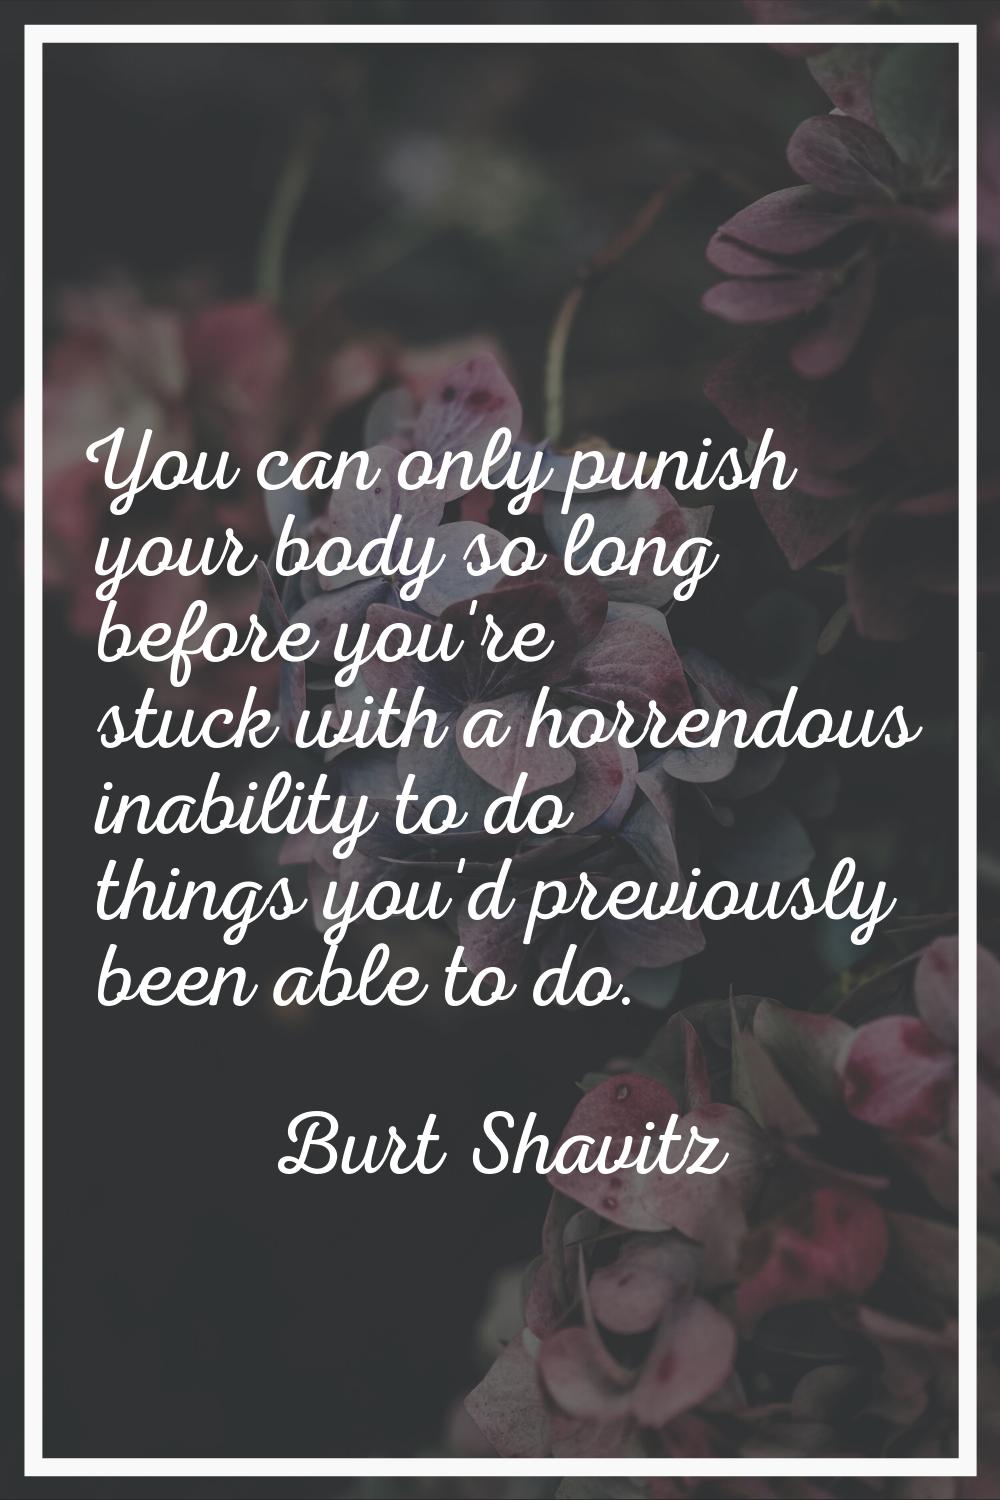 You can only punish your body so long before you're stuck with a horrendous inability to do things 